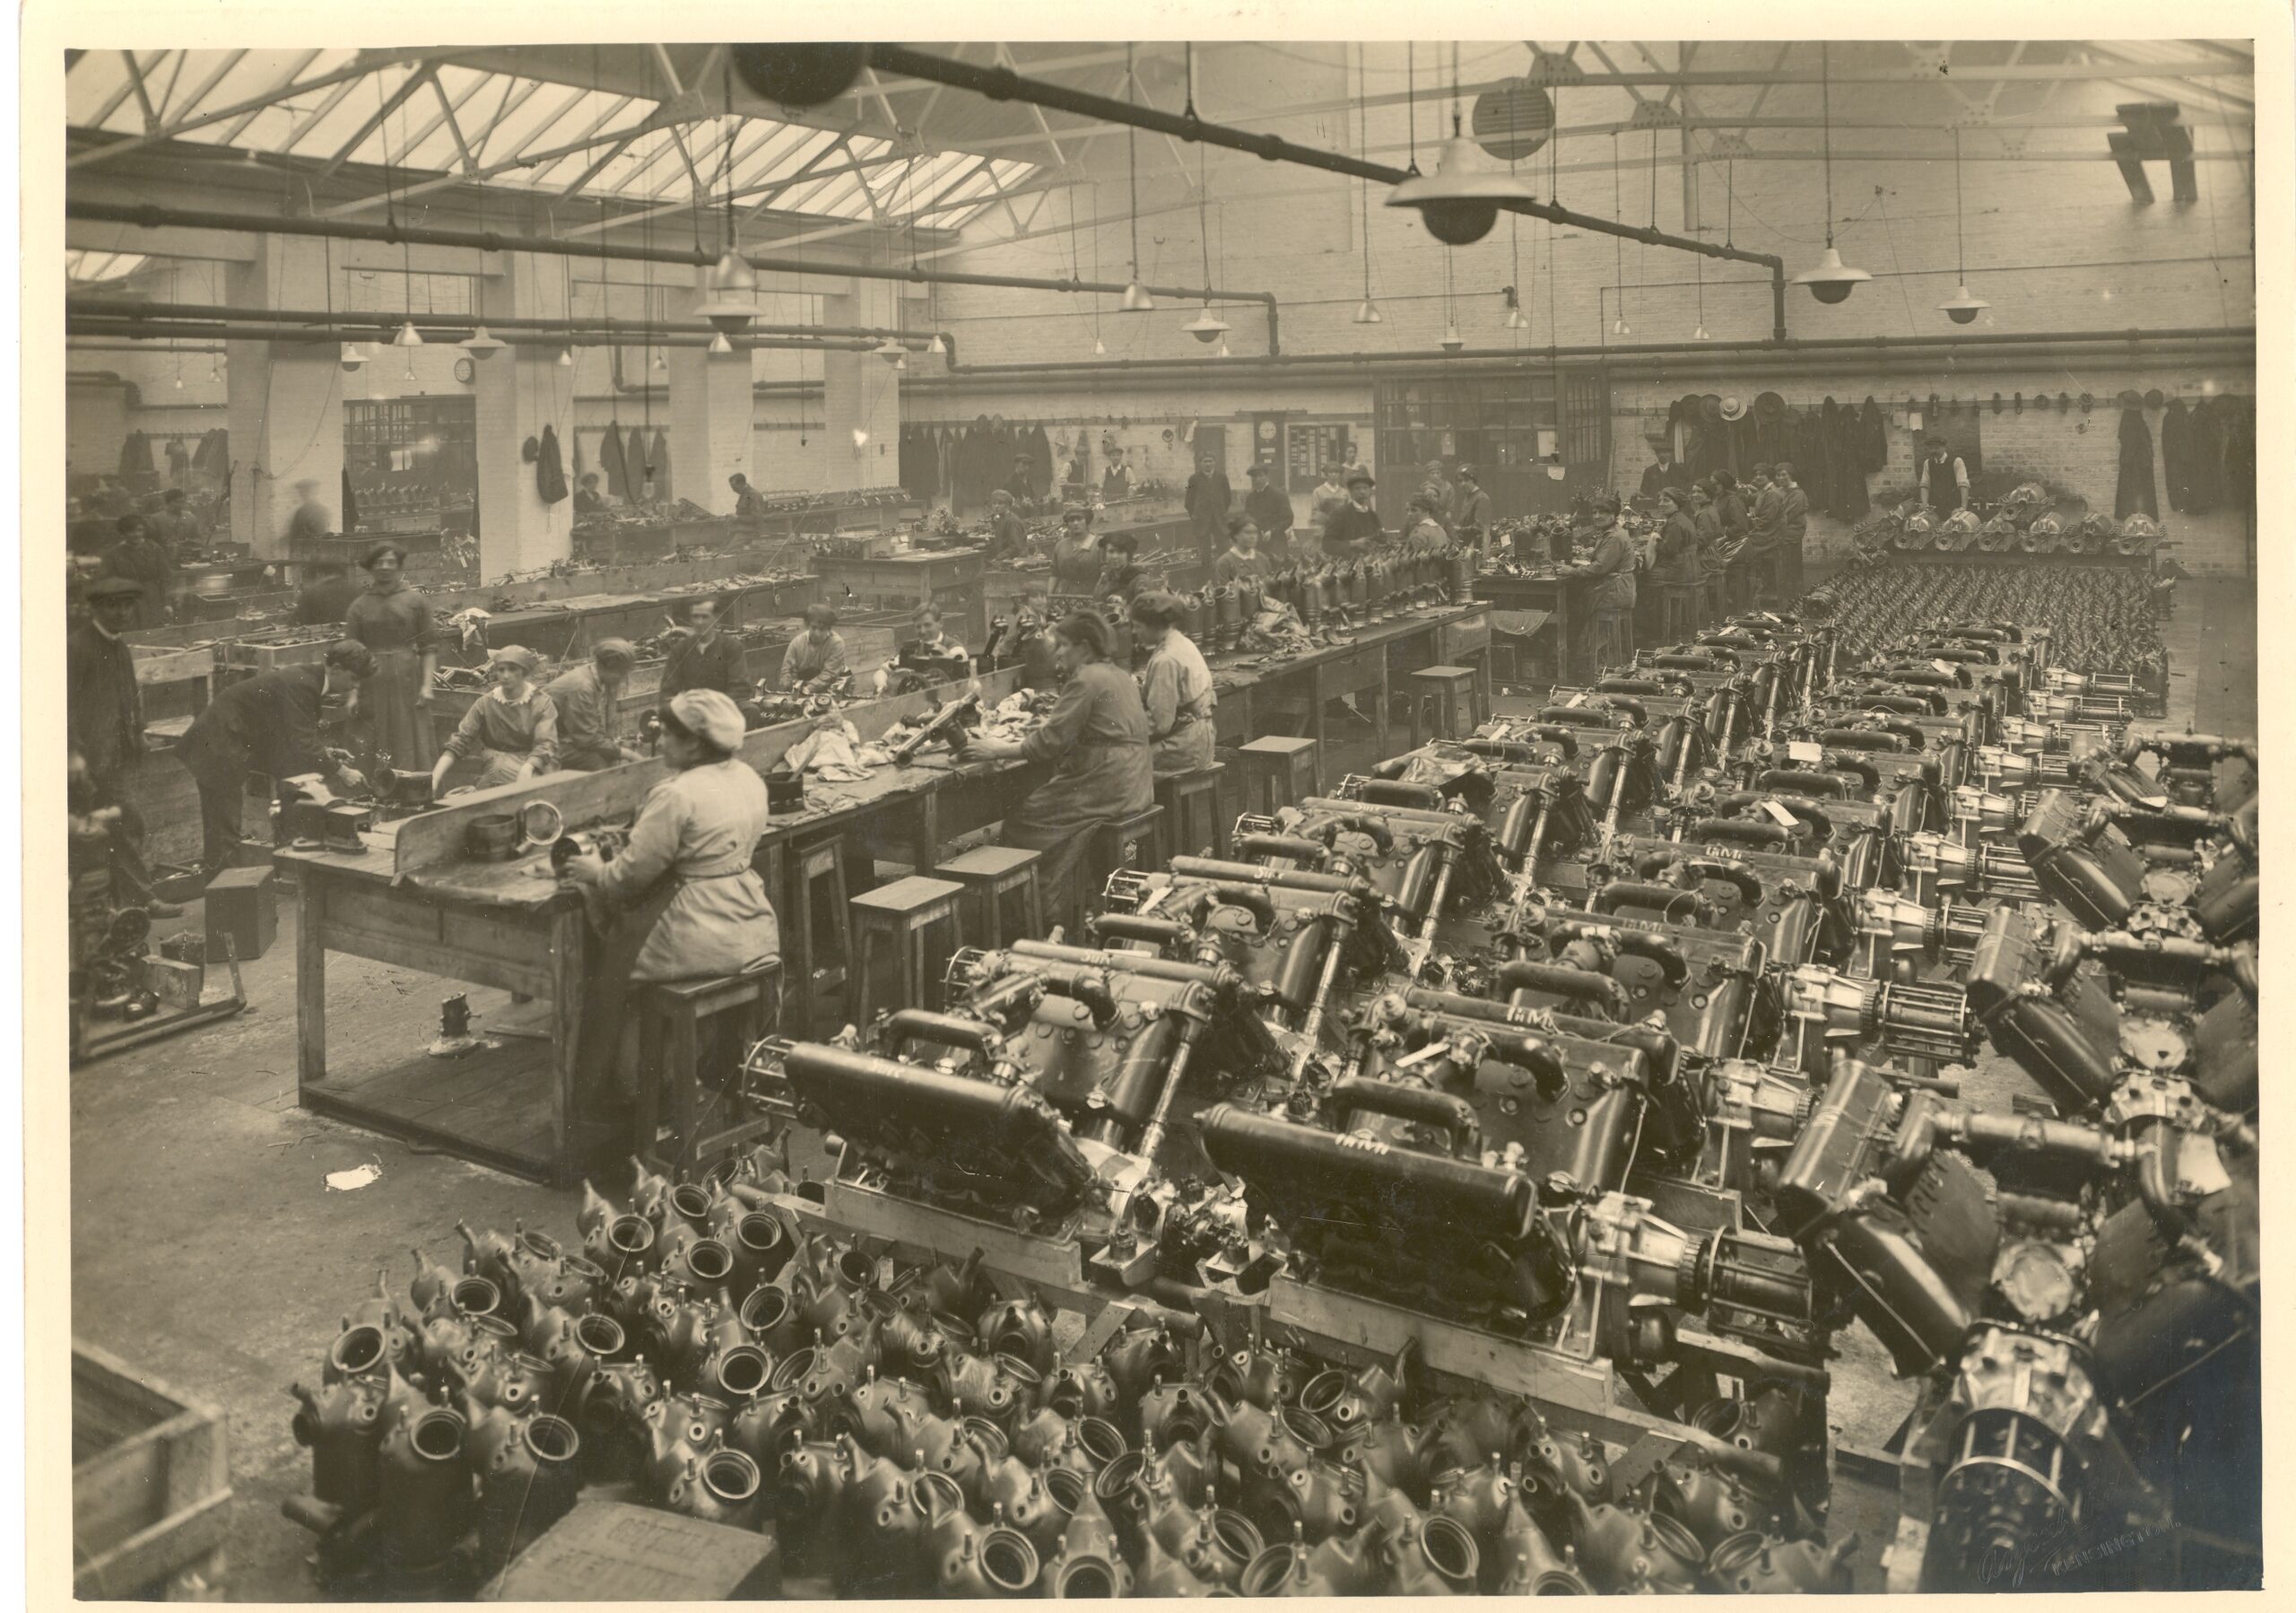 Black and white photograph showing the dismantling of Hispano Suiza aviation engines by female workers in the Gordon Watney & Co Ltd factory.